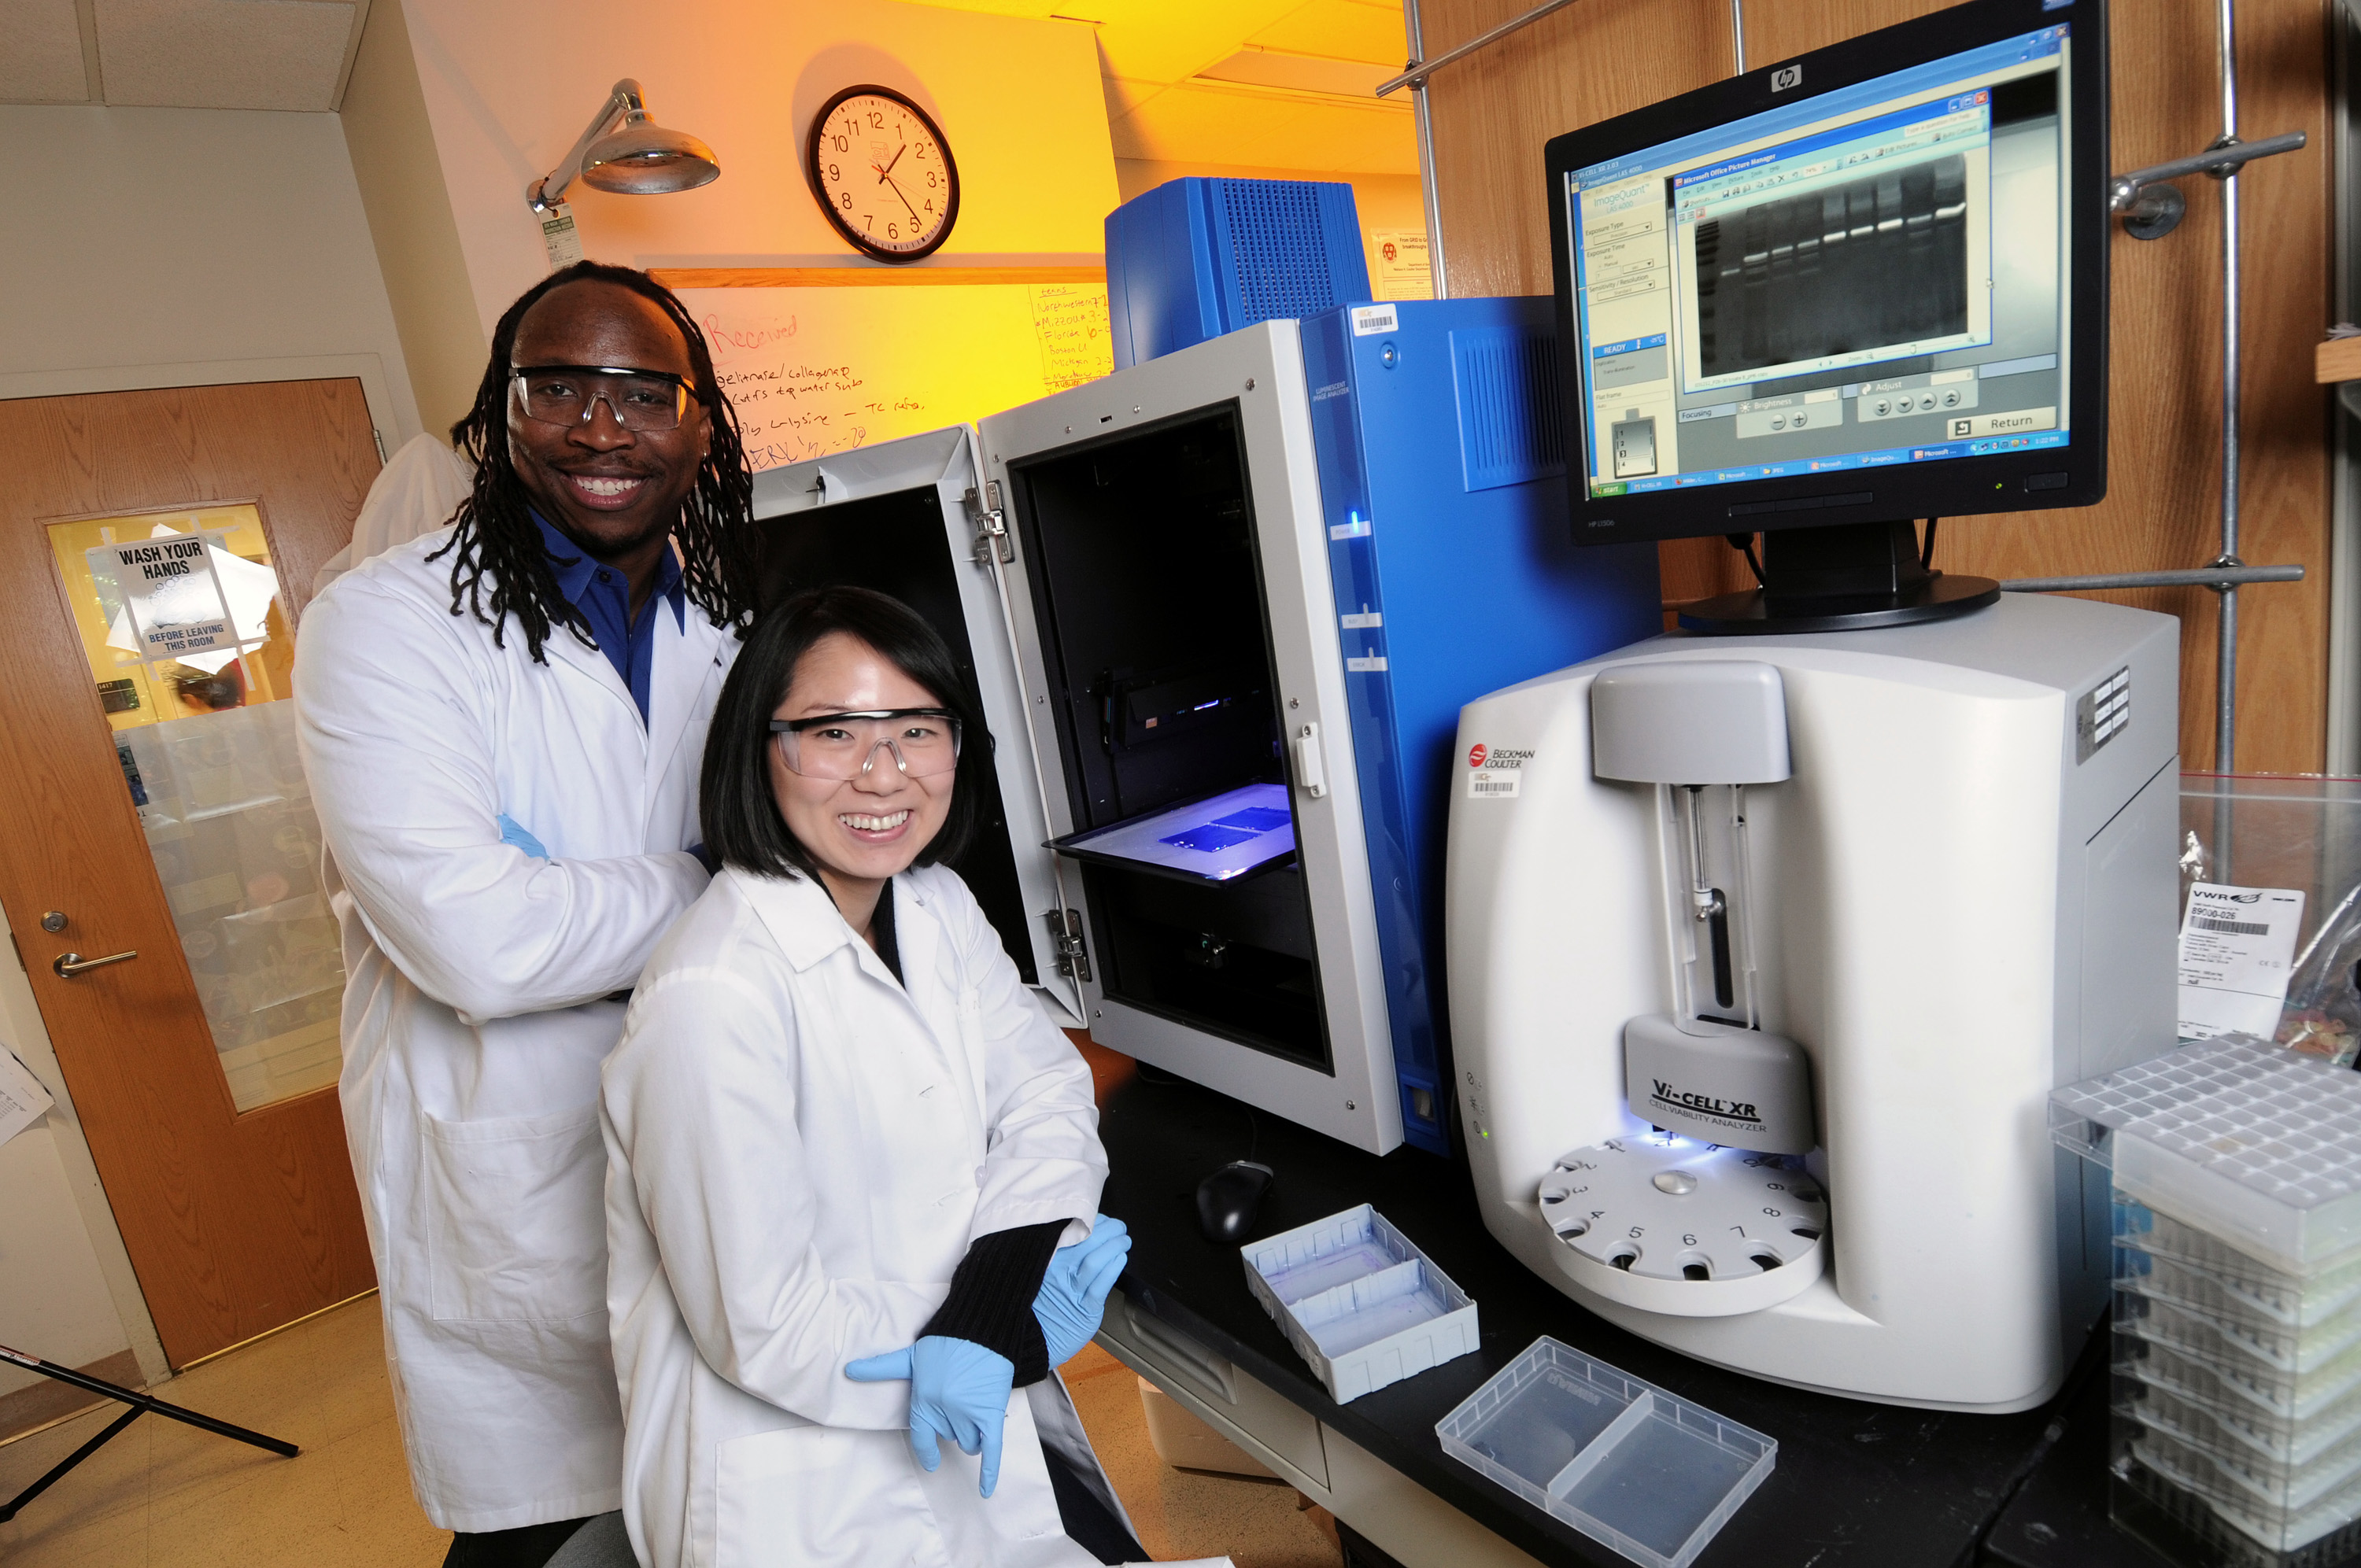 Manu Platt (left), an associate professor in the Wallace H. Coulter Department of Biomedical Engineering at Georgia Tech and Emory University, and graduate student Keon-Young Park, produce high-quality images from the gels shown to quantify cathepsin activity. In a new study, the researchers are studying levels of cathepsins and other signaling chemicals in an effort to predict the invasiveness of breast cancer in individual patients. (Credit: Gary Meek, Georgia Tech)